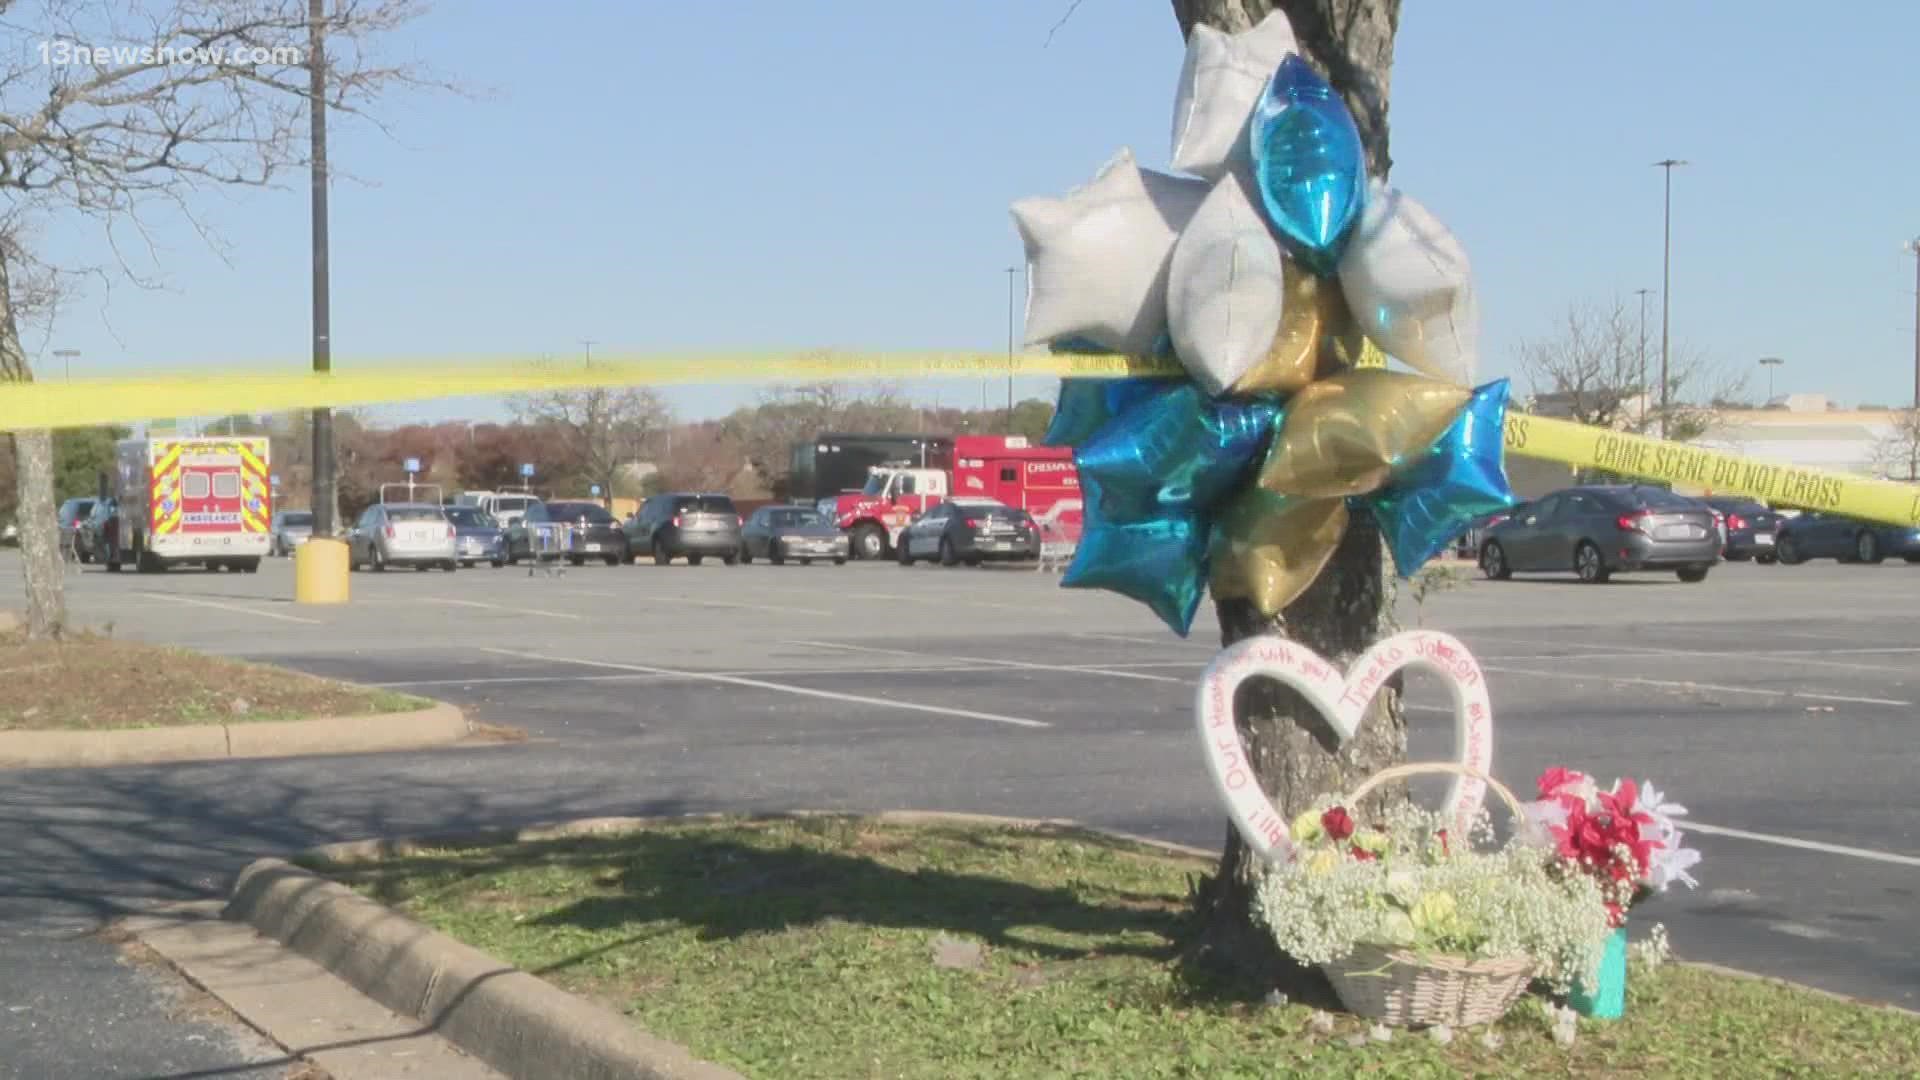 Community members in Chesapeake placed flowers, candles and balloons at a makeshift memorial to the victims of the Walmart mass shooting.